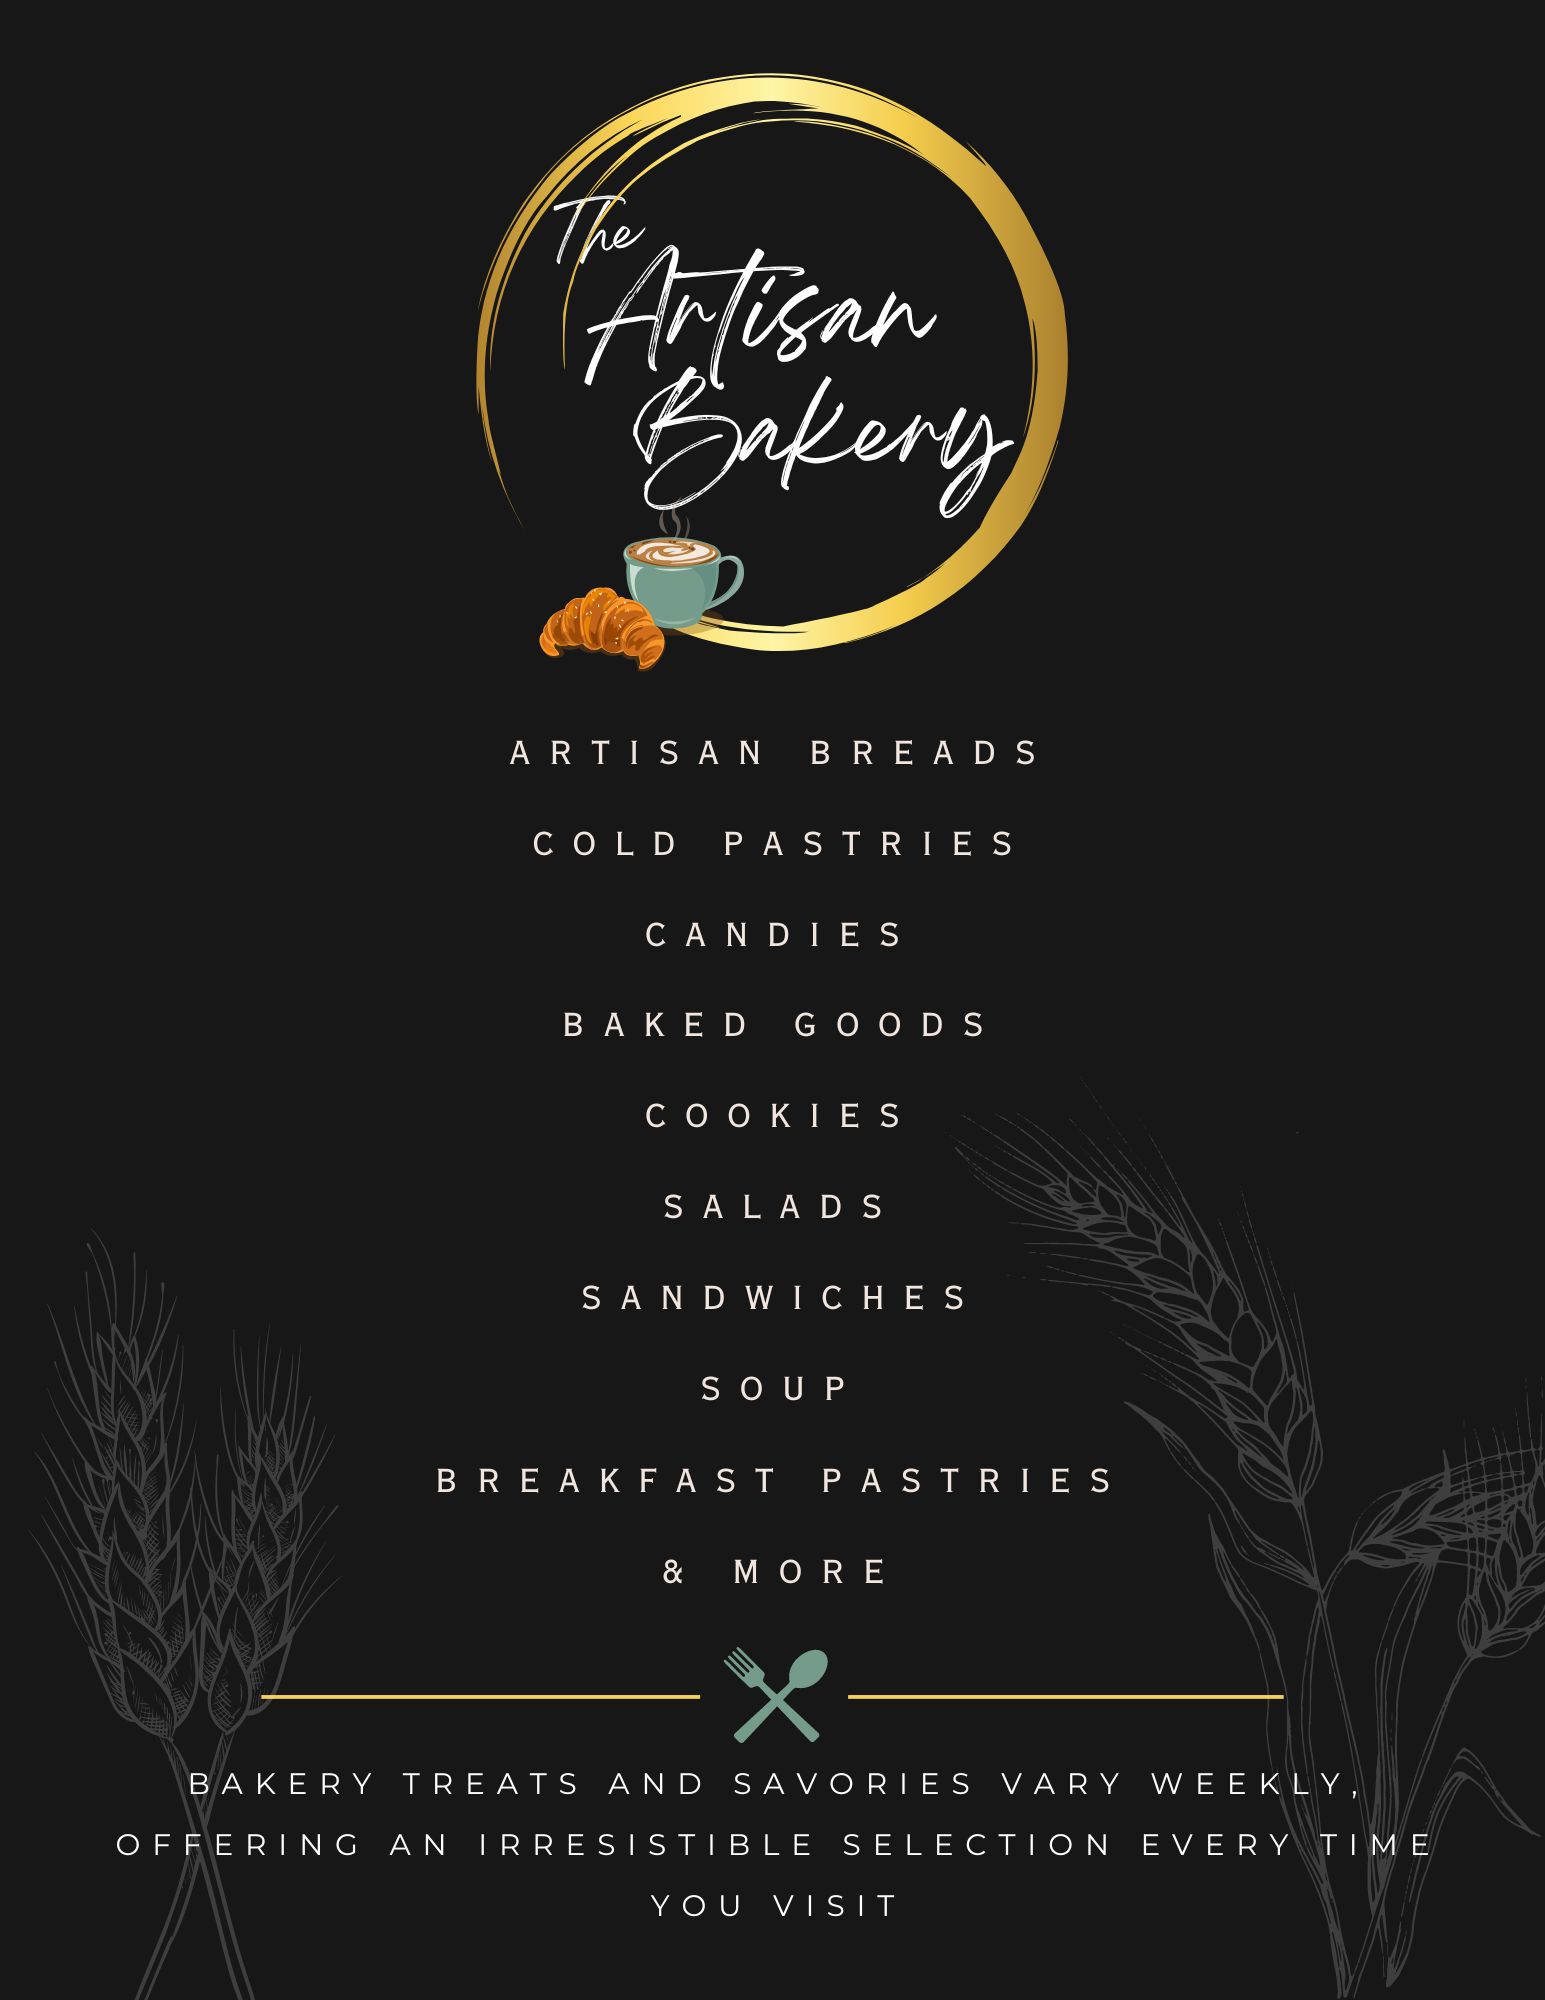 Artisan staple menu includes artisan breads, cold pastries, candies, baked goods, cookies, salads, sandwiches, soup.